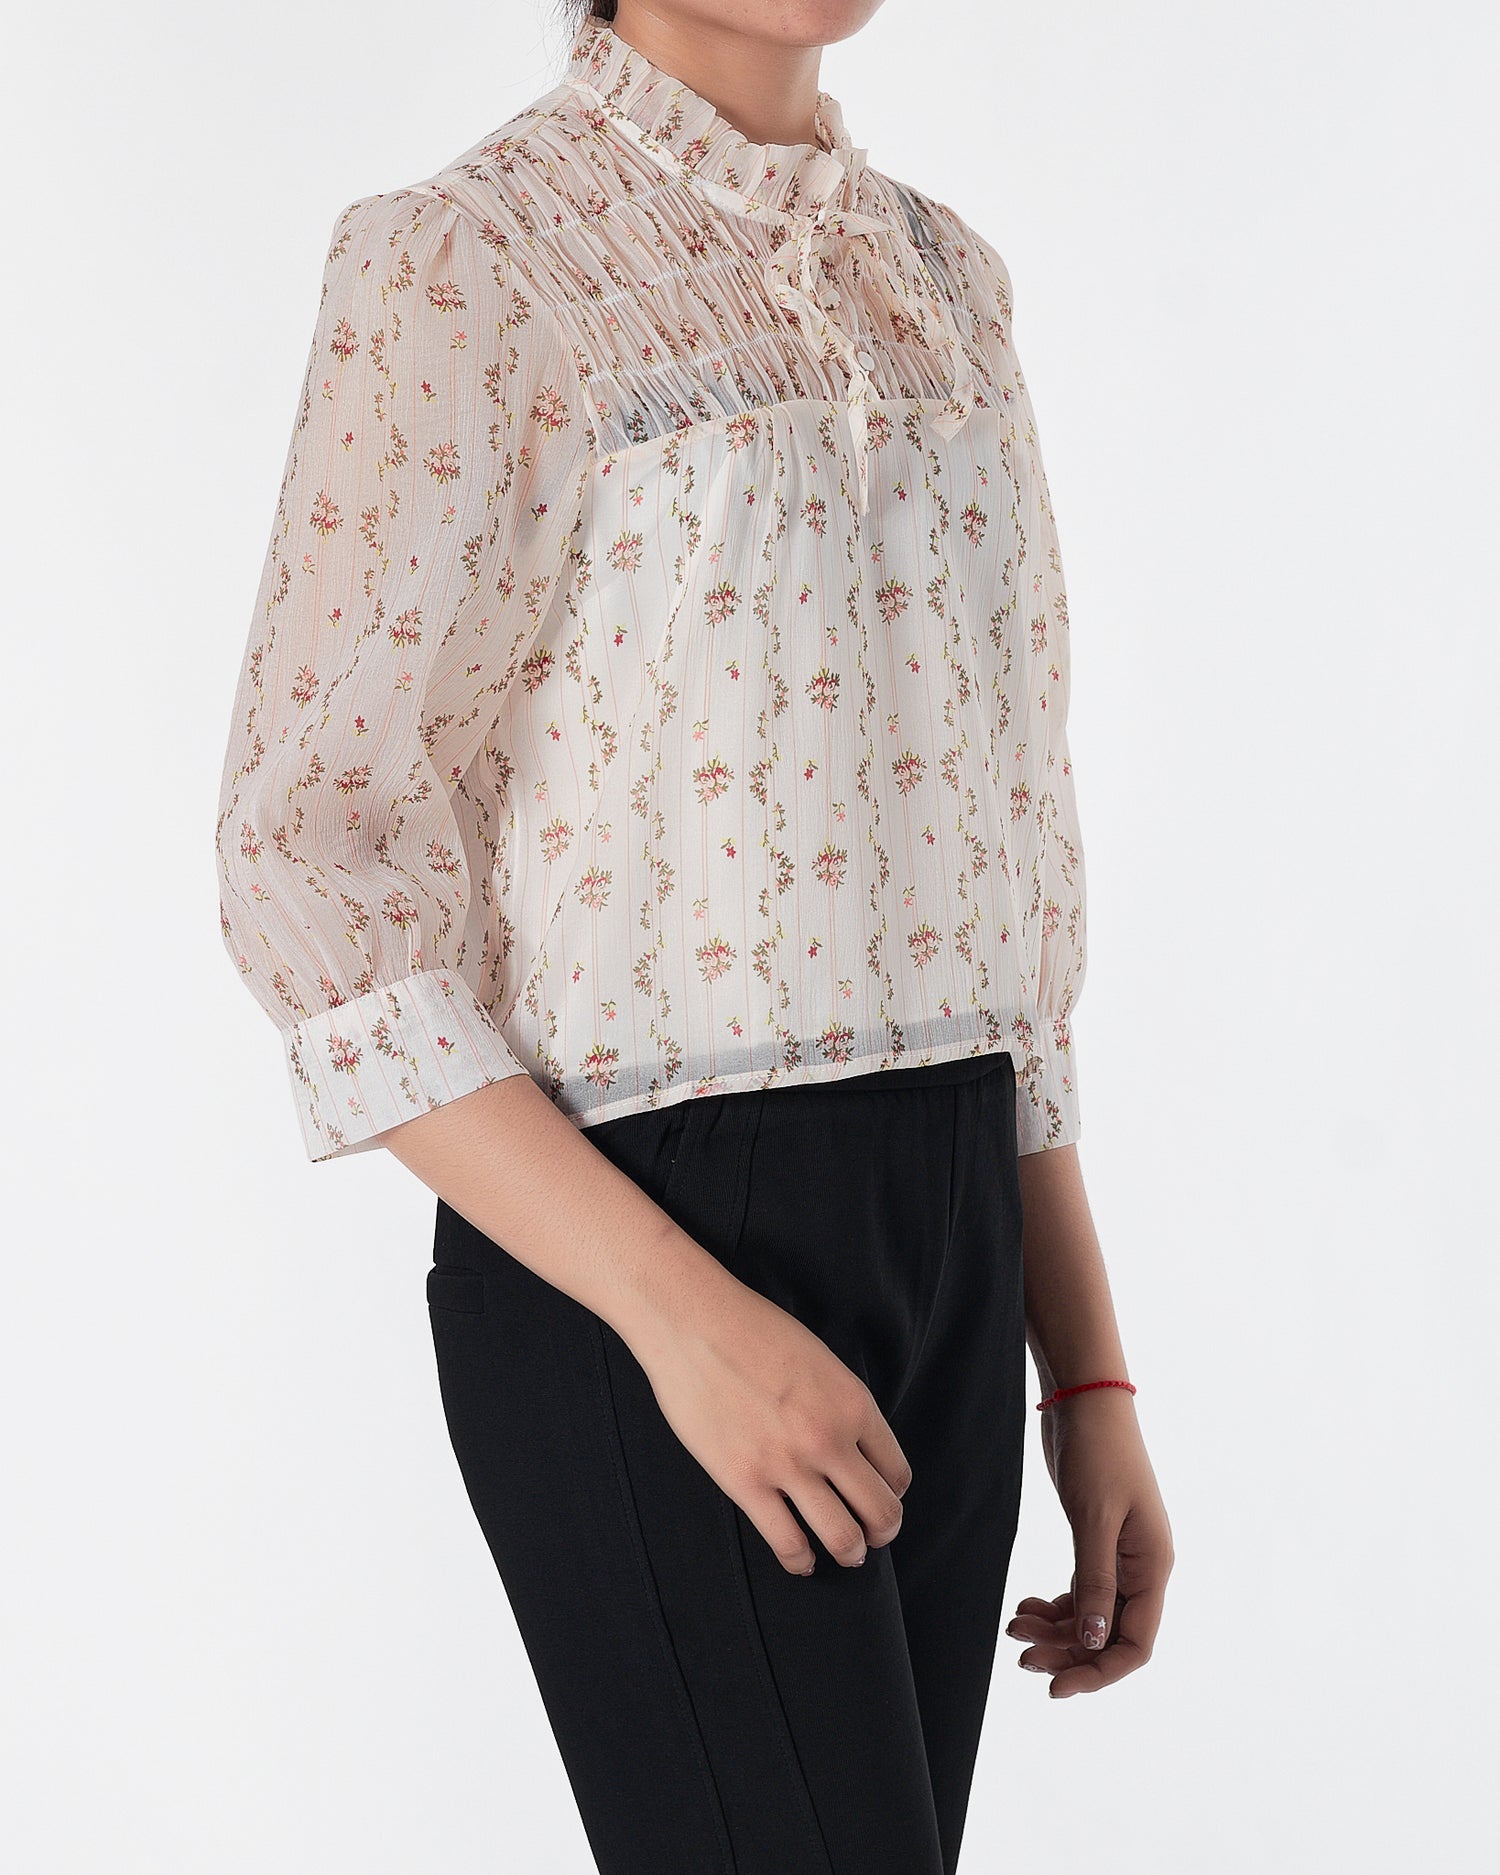 Floral Over Printed Lady Shirts Short Sleeve 14.90